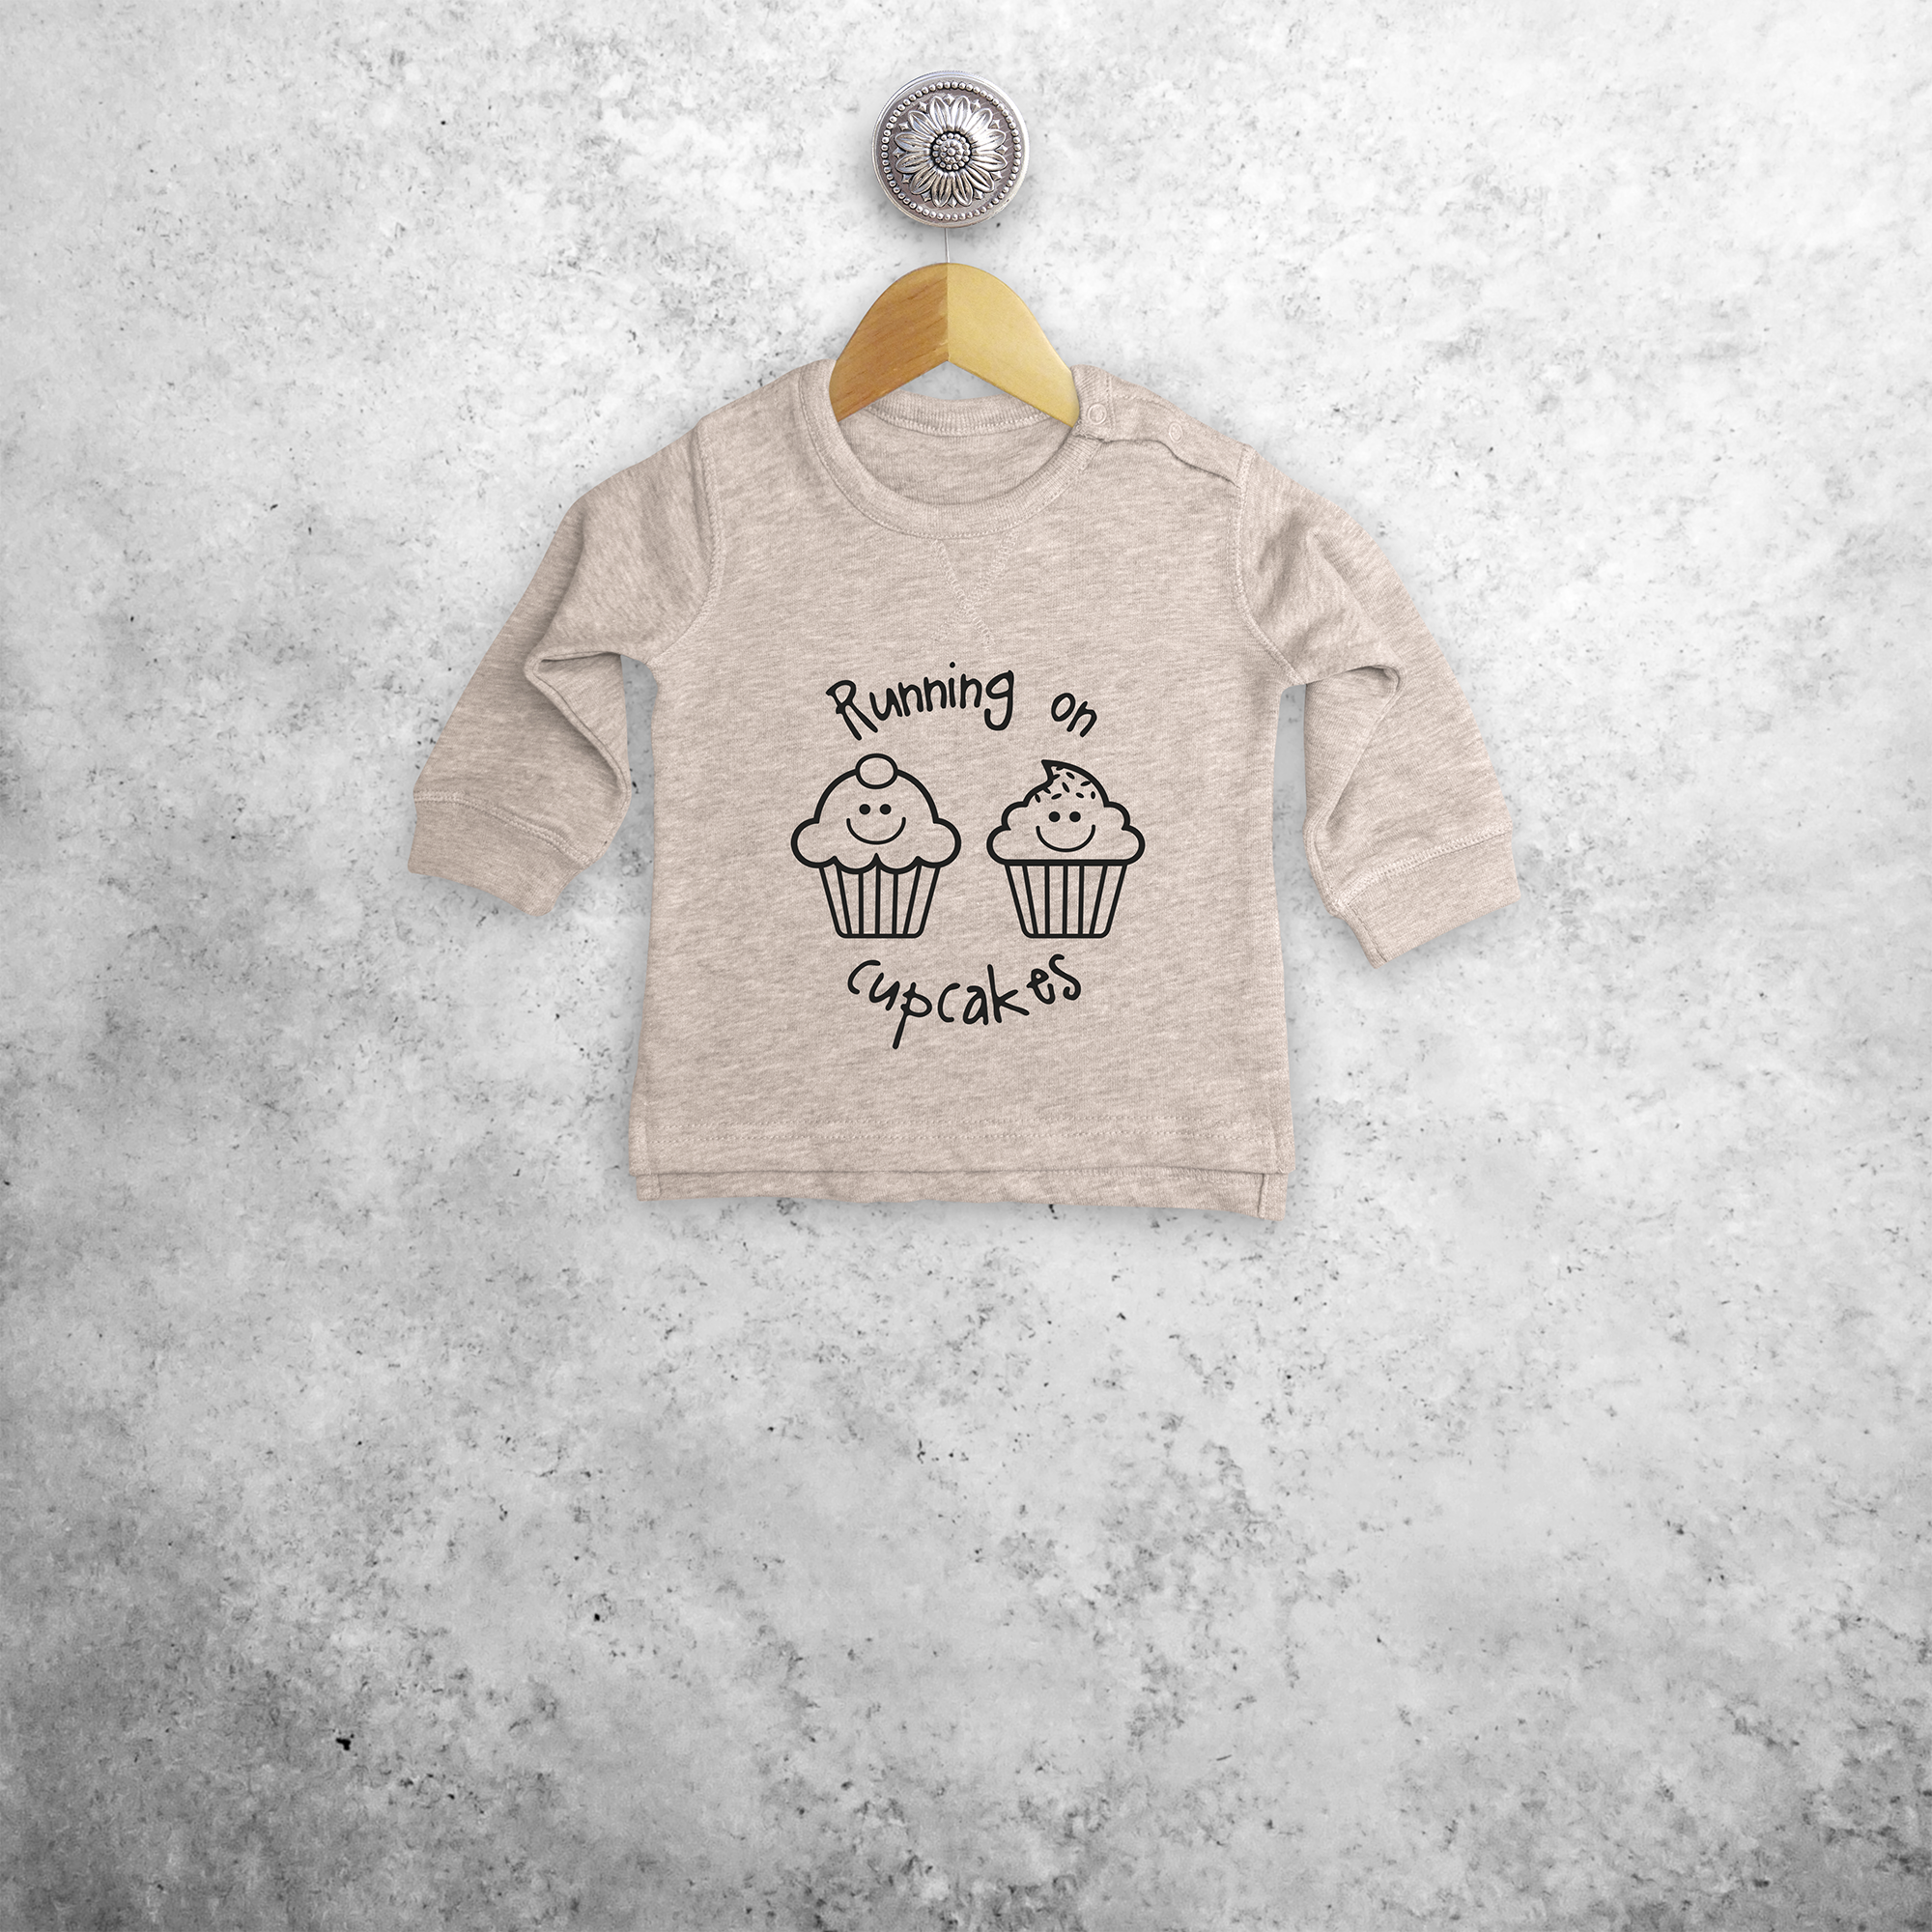 'Running on cupcakes' baby sweater